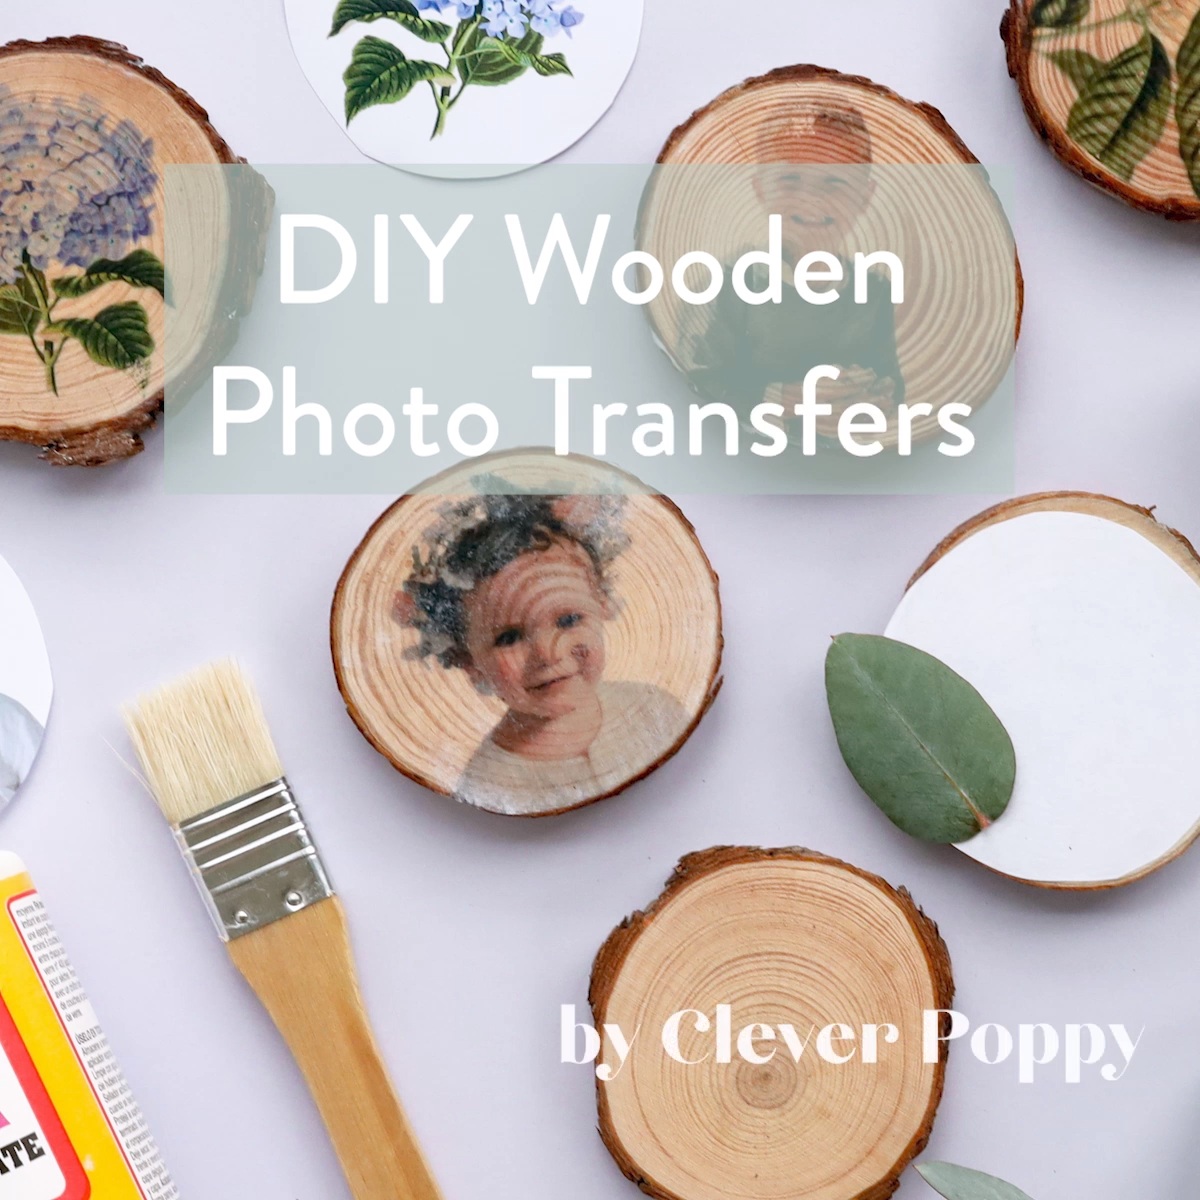 DIY Wooden Photo Transfers - Clever Poppy -   18 diy projects Wedding photo transfer ideas